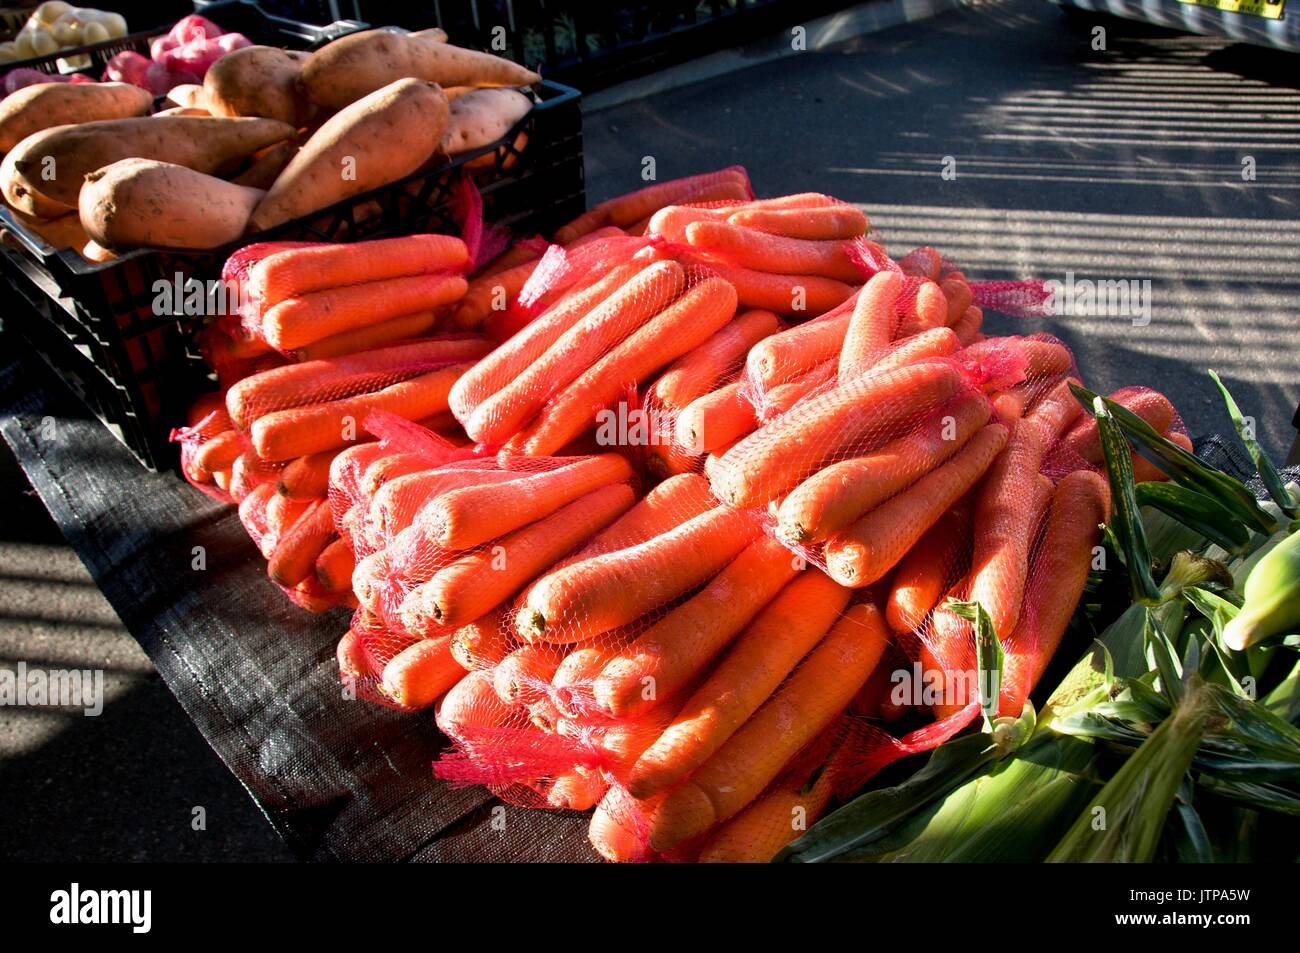 A table display of fresh nutritious vegetables at a farmer's market,  includes, Carrots - (Daucus carota subsp. sativus), and Sweet Potato - (Ipomoea  Stock Photo